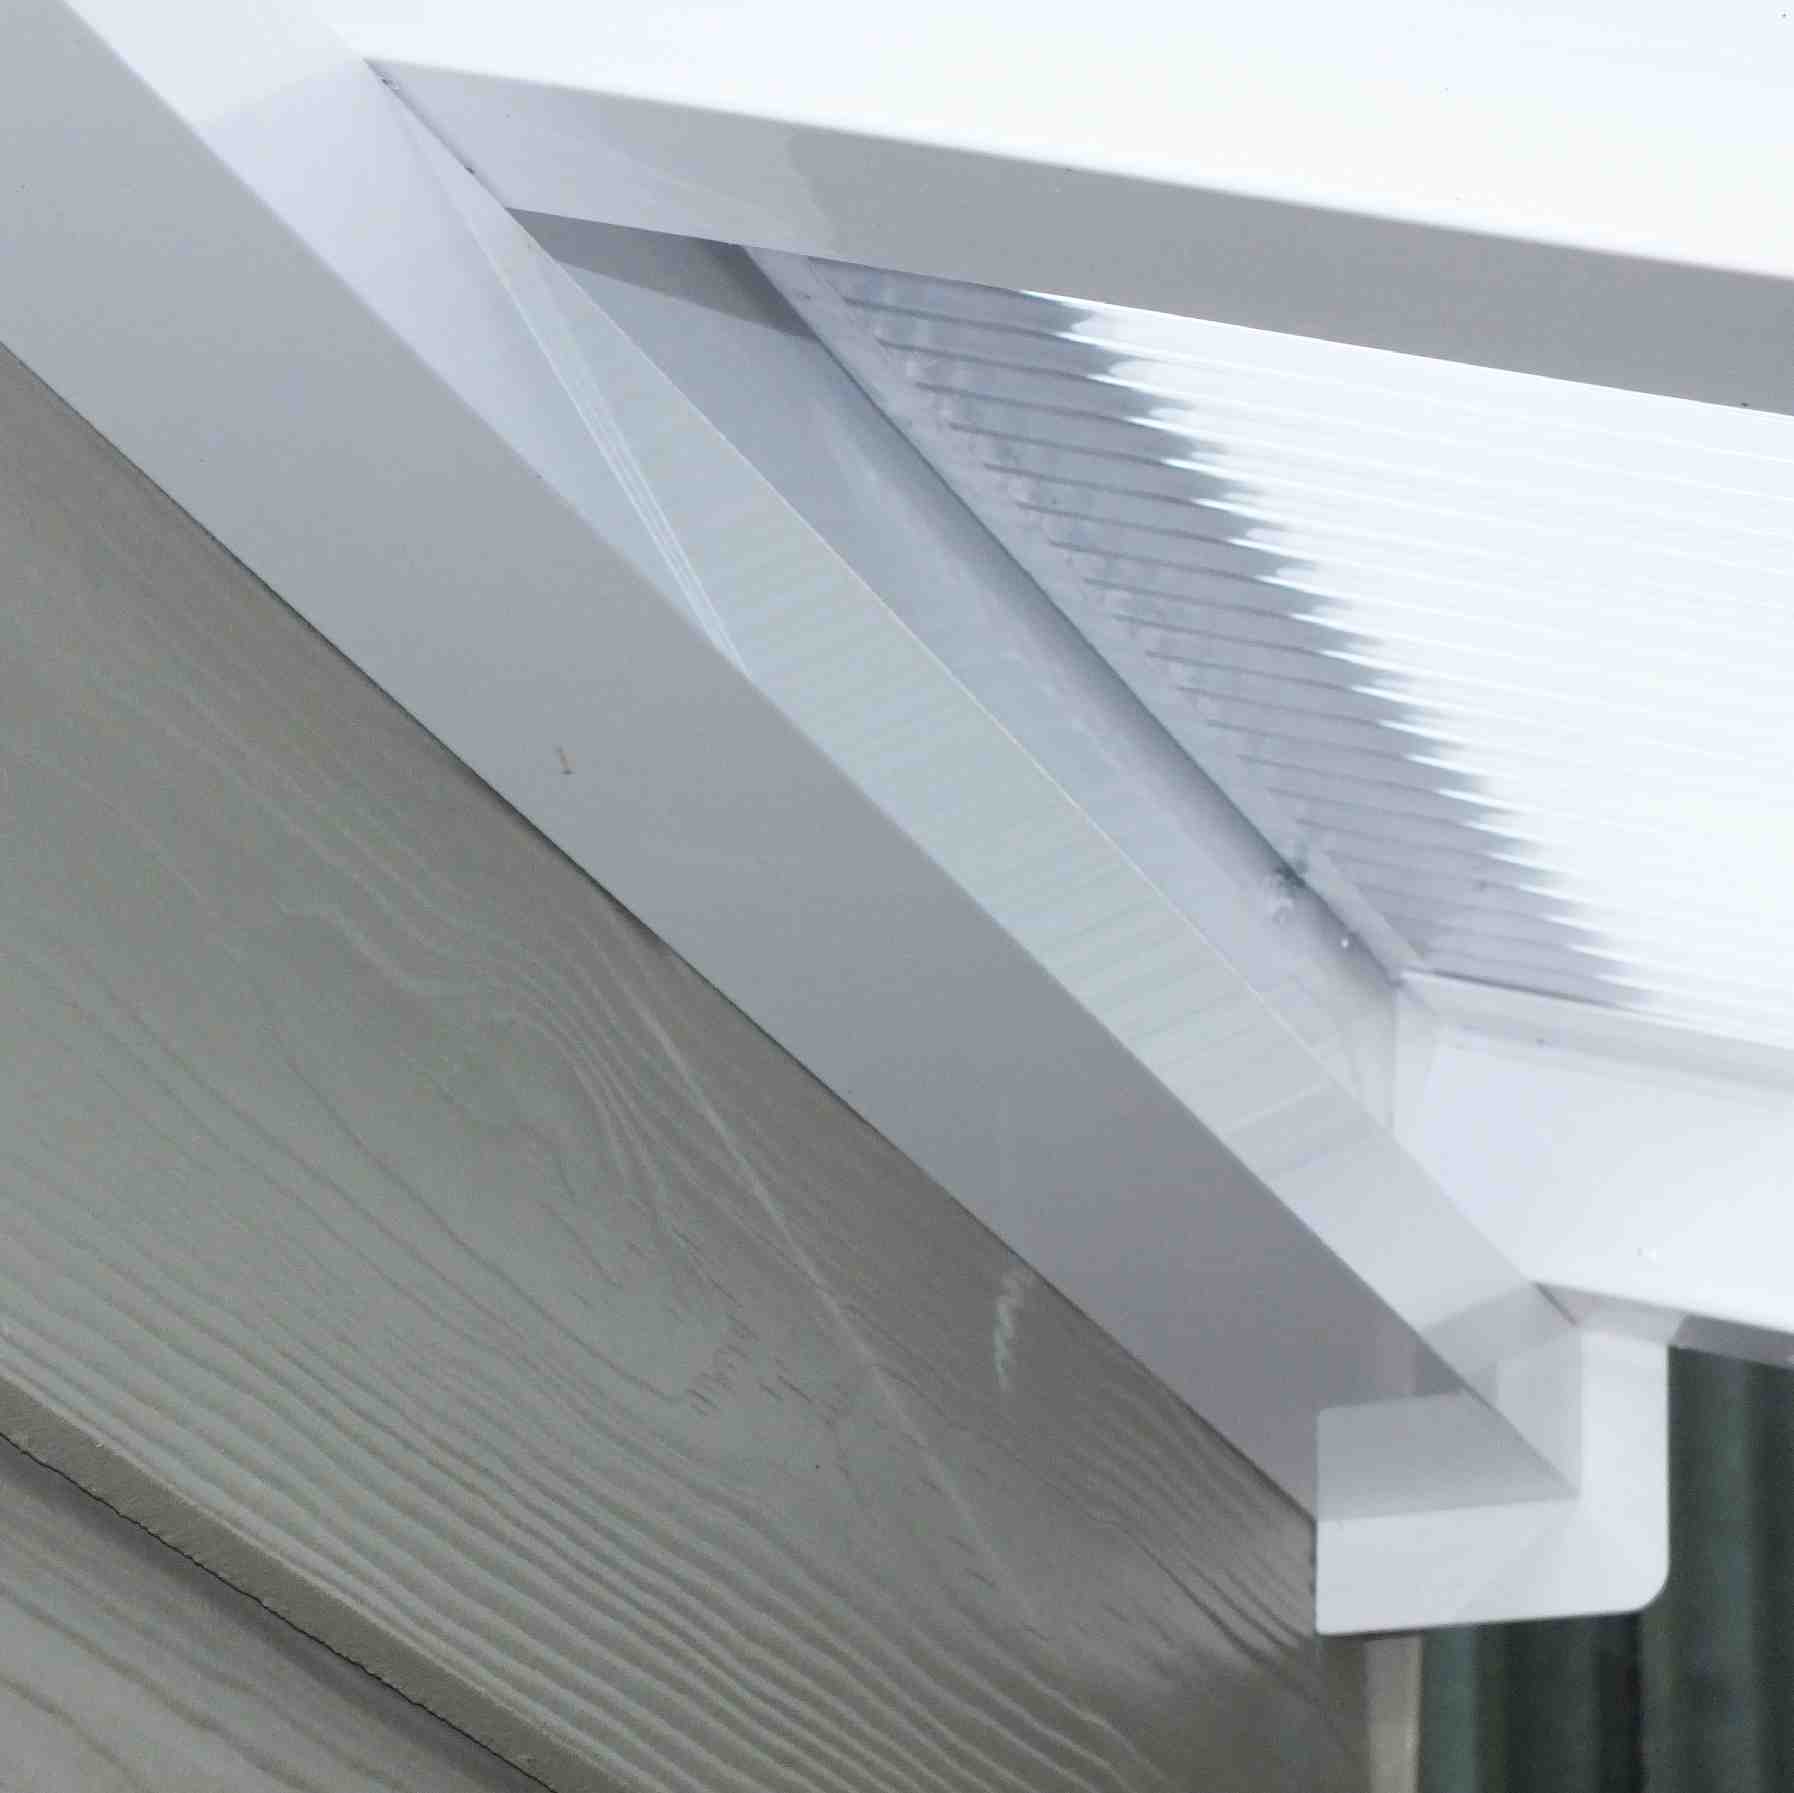 Great deals on Omega Verandah White with 16mm Polycarbonate Glazing - 9.9m (W) x 3.5m (P), (5) Supporting Posts